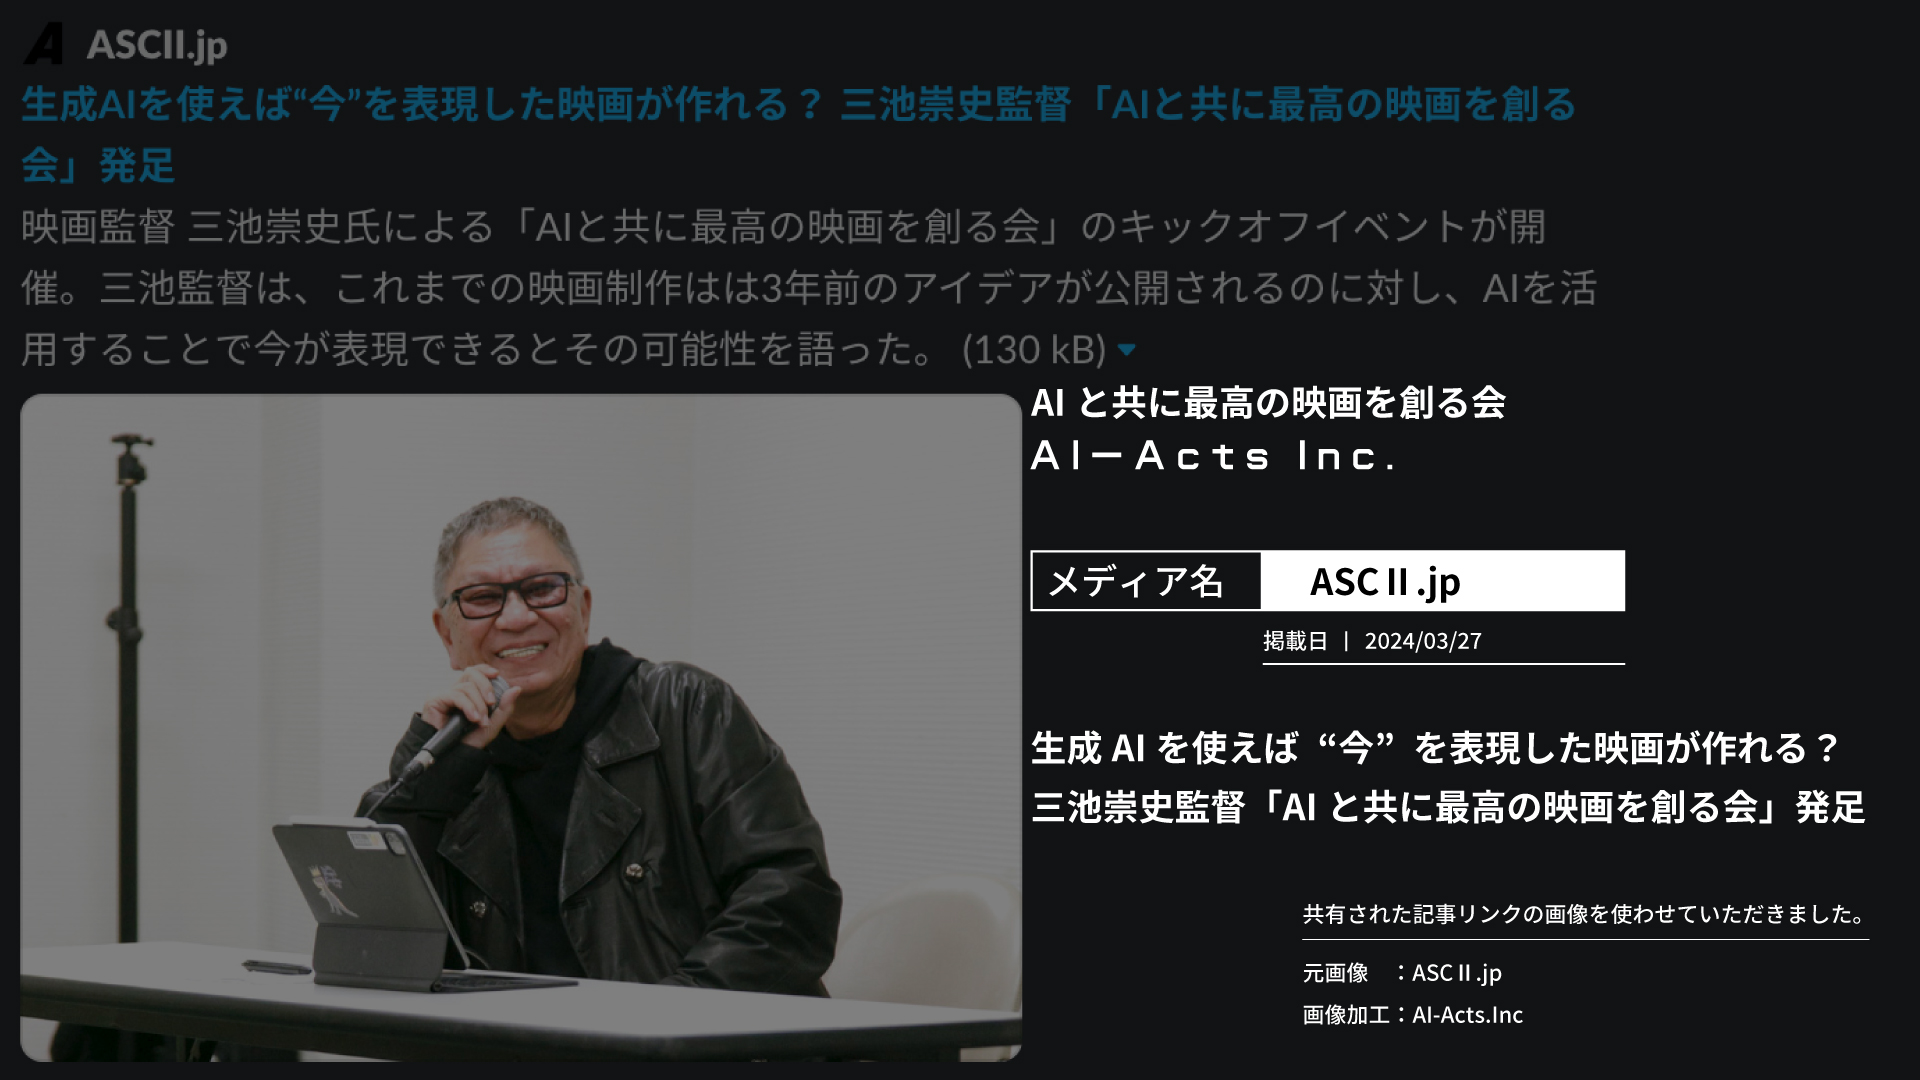 The kickoff event has been featured on ASCⅡ.jp.